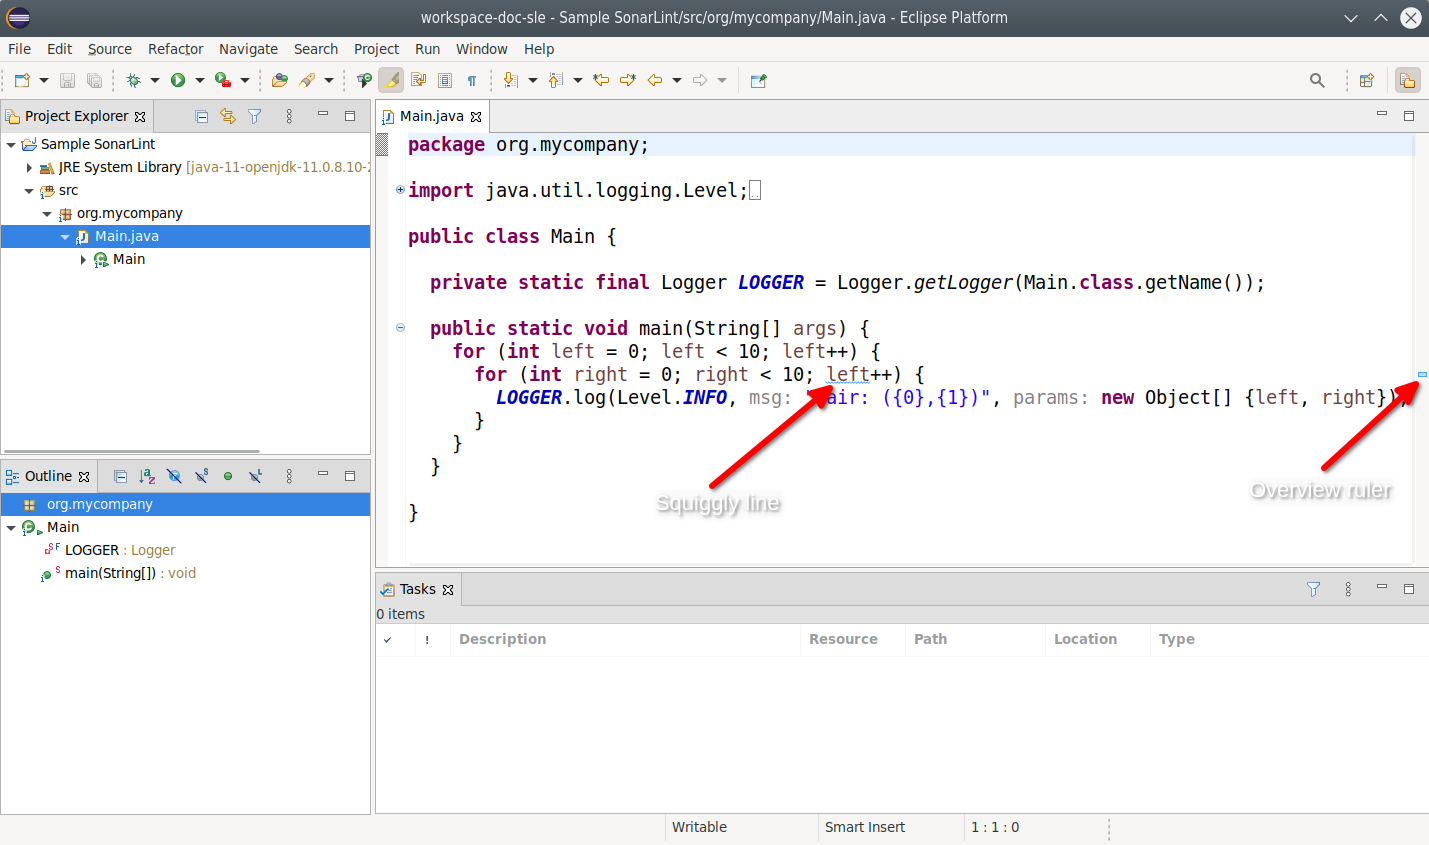 SonarLint gives you squiggly lines and a ruled line in the sidebar to help call out issues in the Eclipse code explorer.